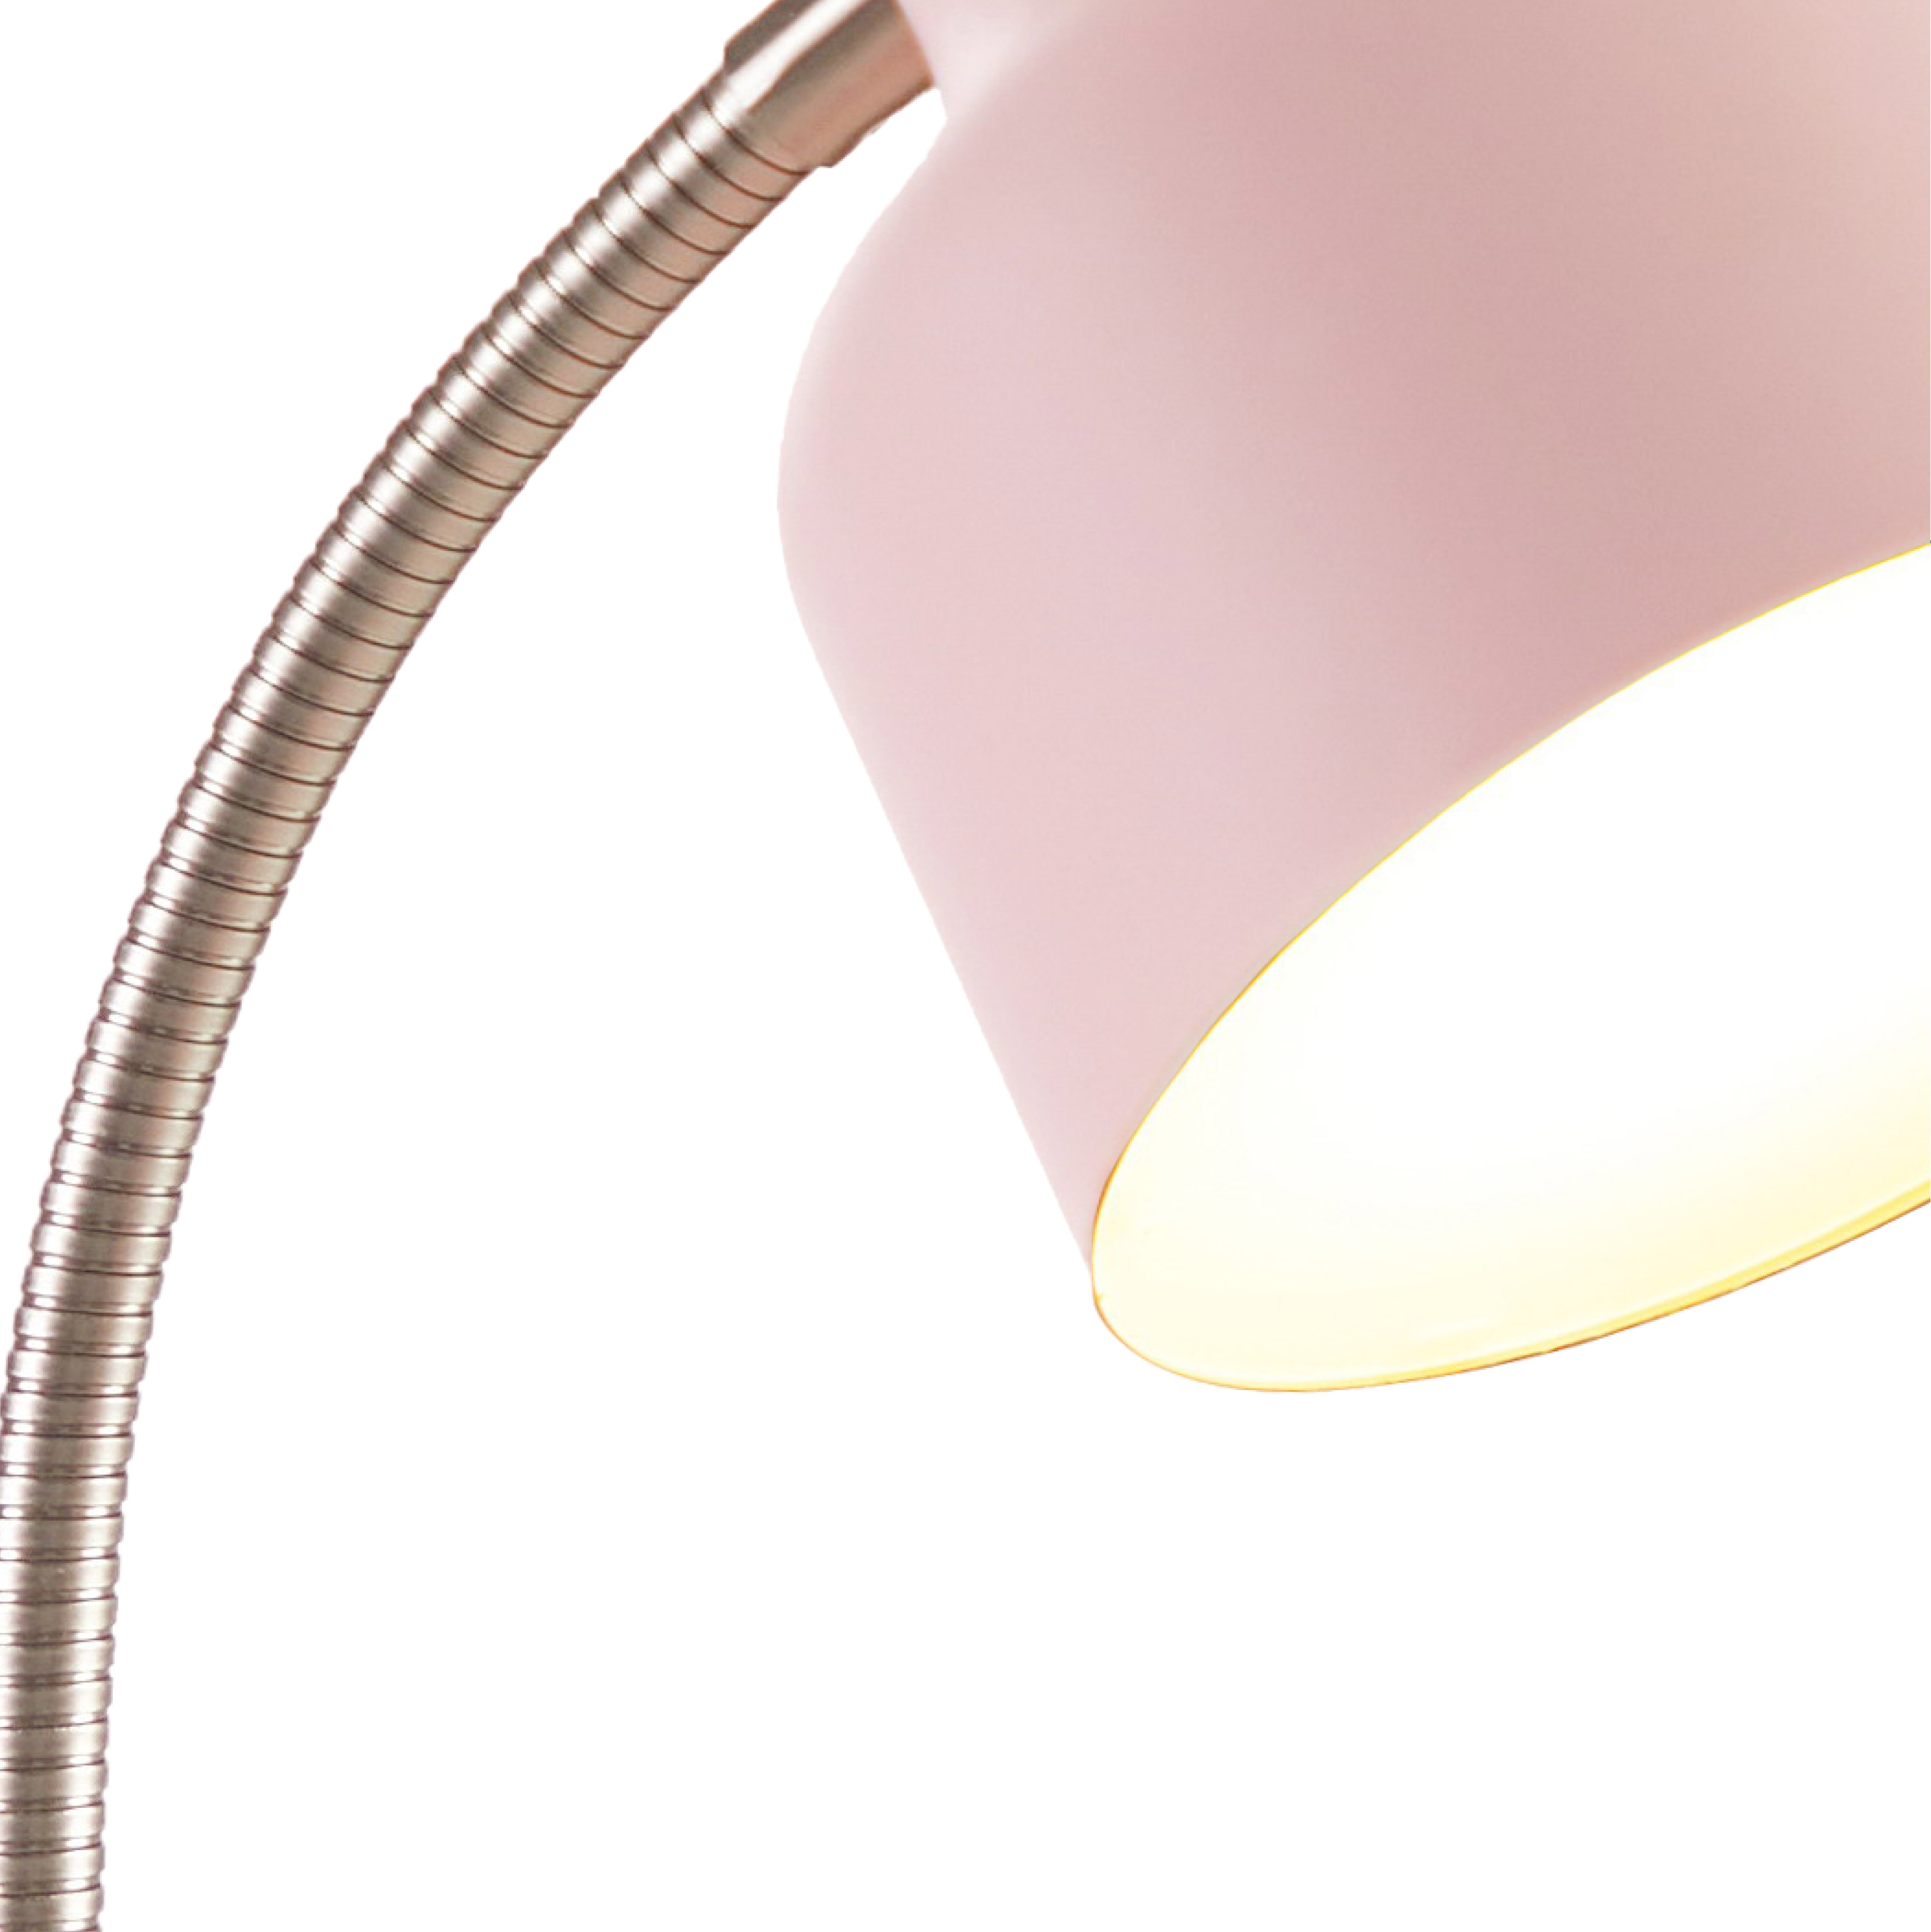 Mainstays LED Desk Lamp with Catch-All Base & AC Outlet, Matte Blush Pink - image 4 of 10